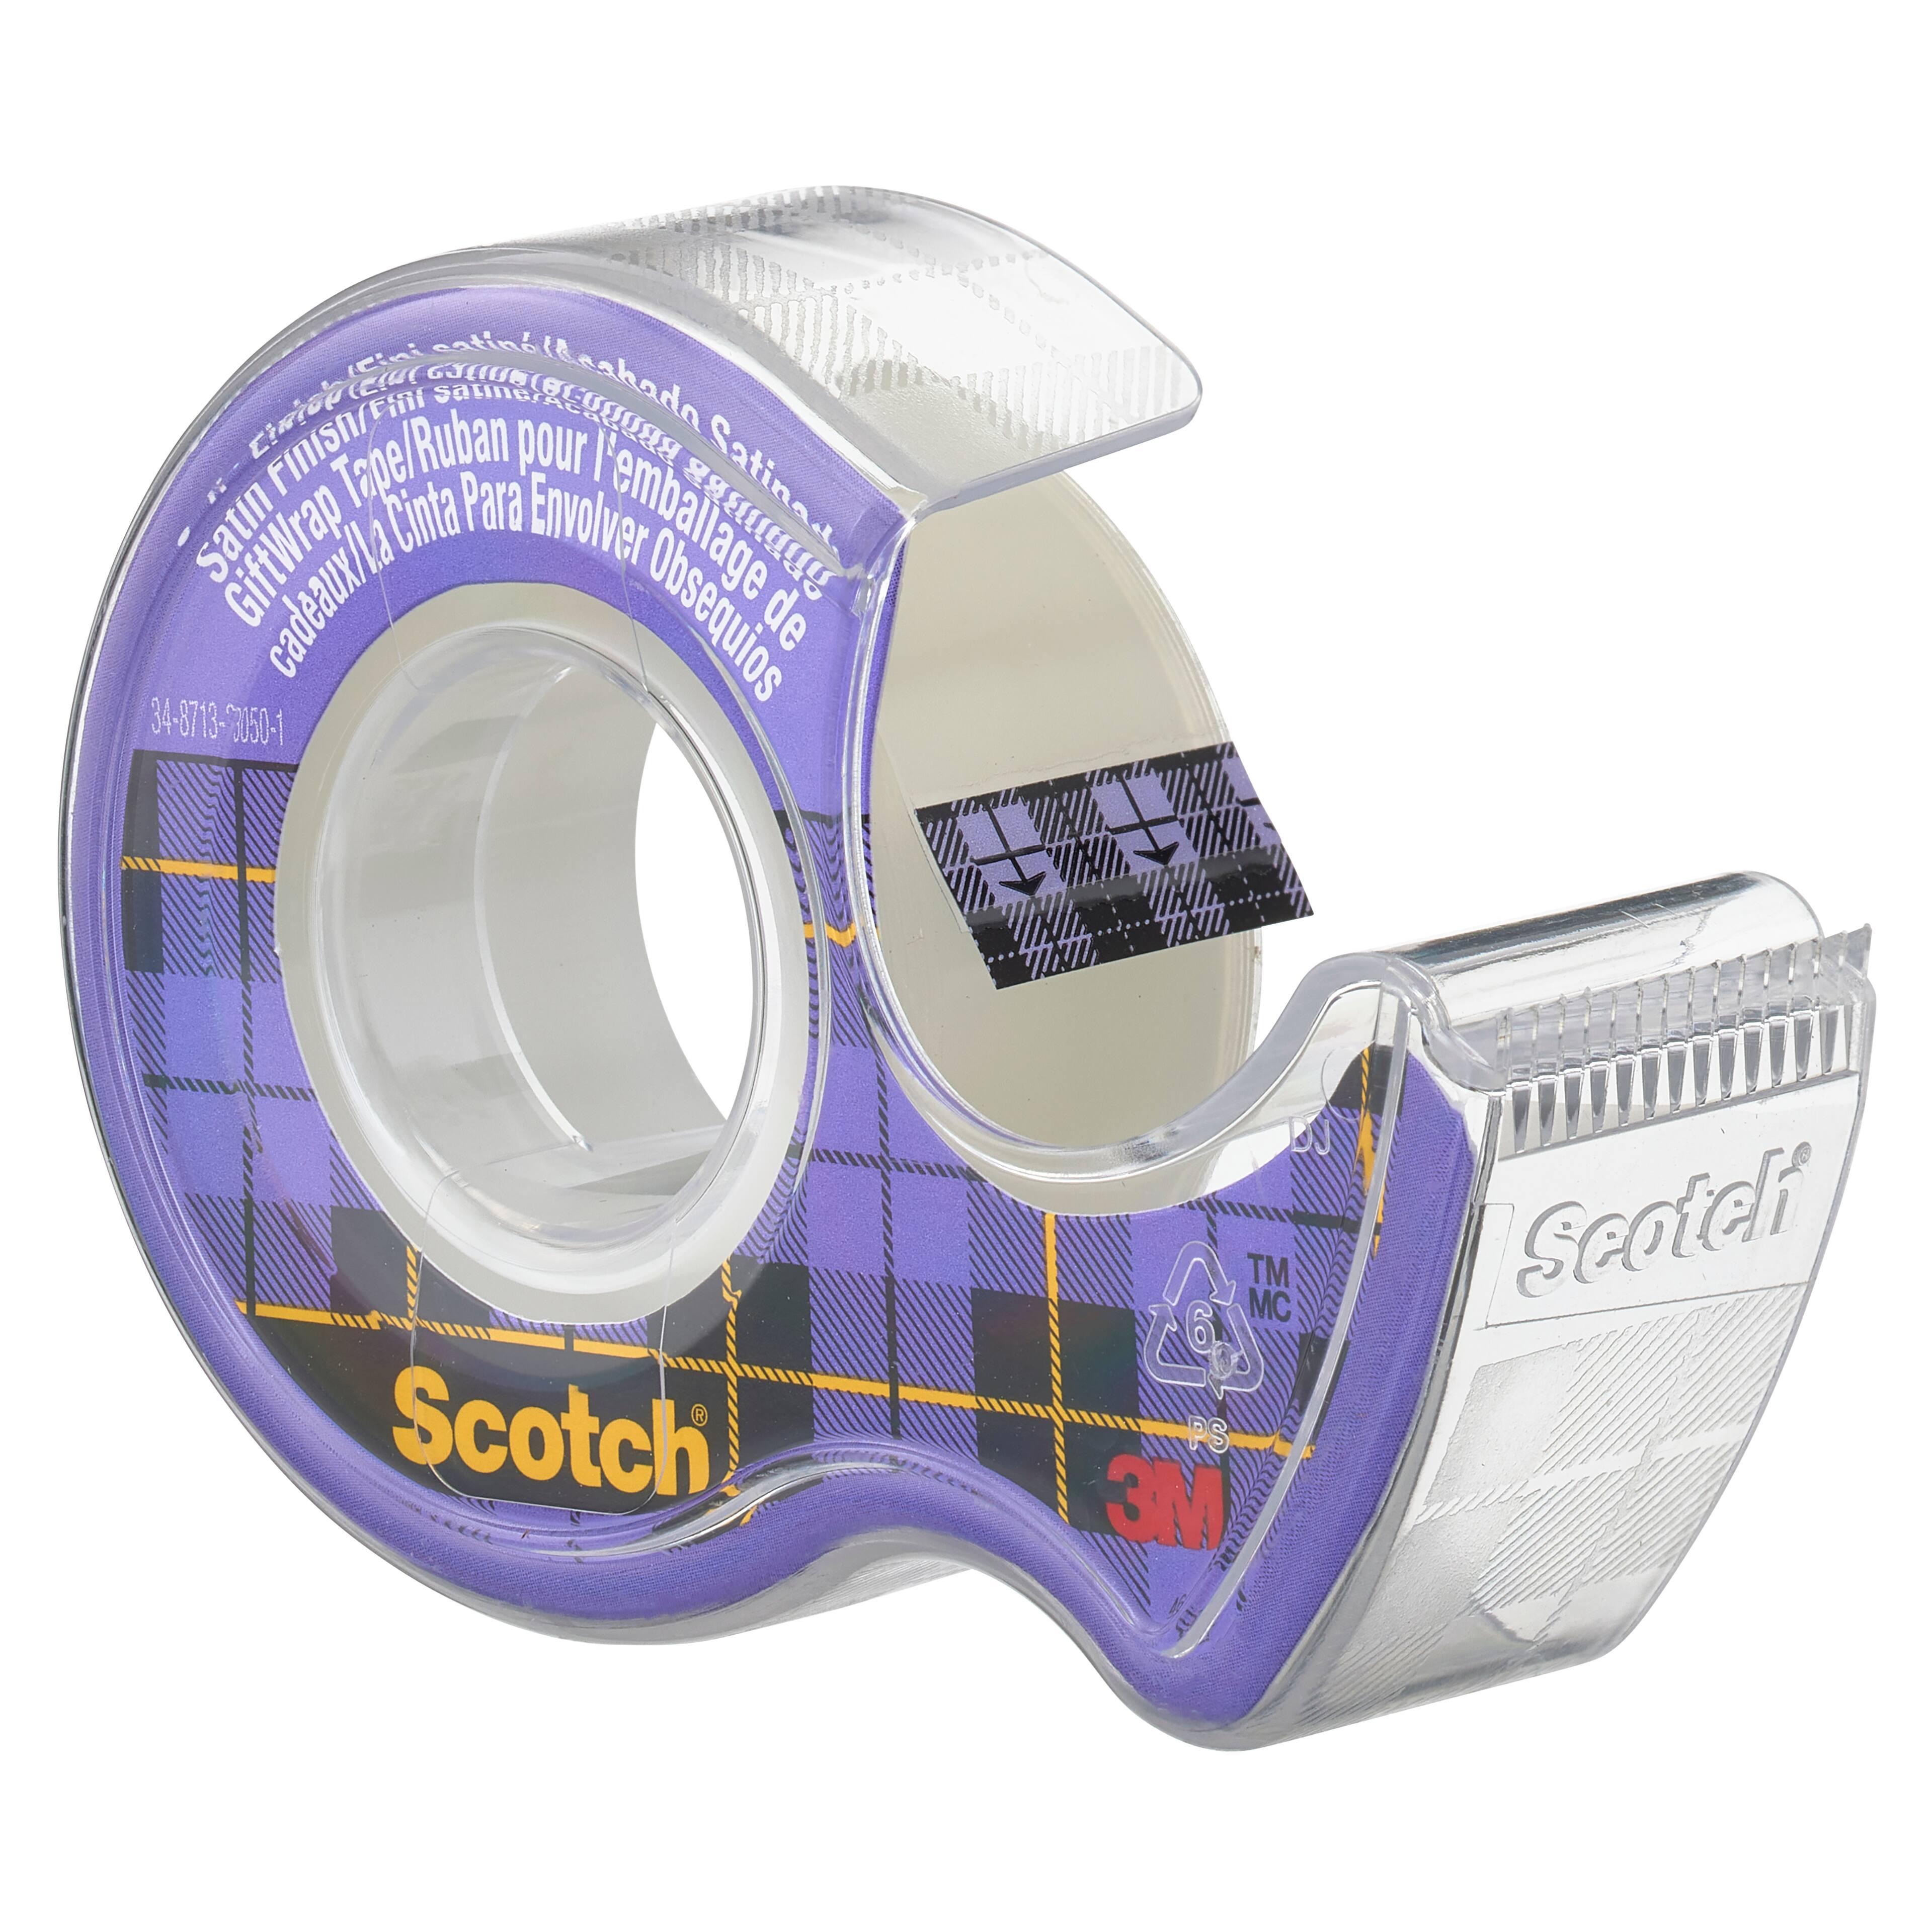 Scotch Gift Wrap Tape (3 ct) Delivery - DoorDash